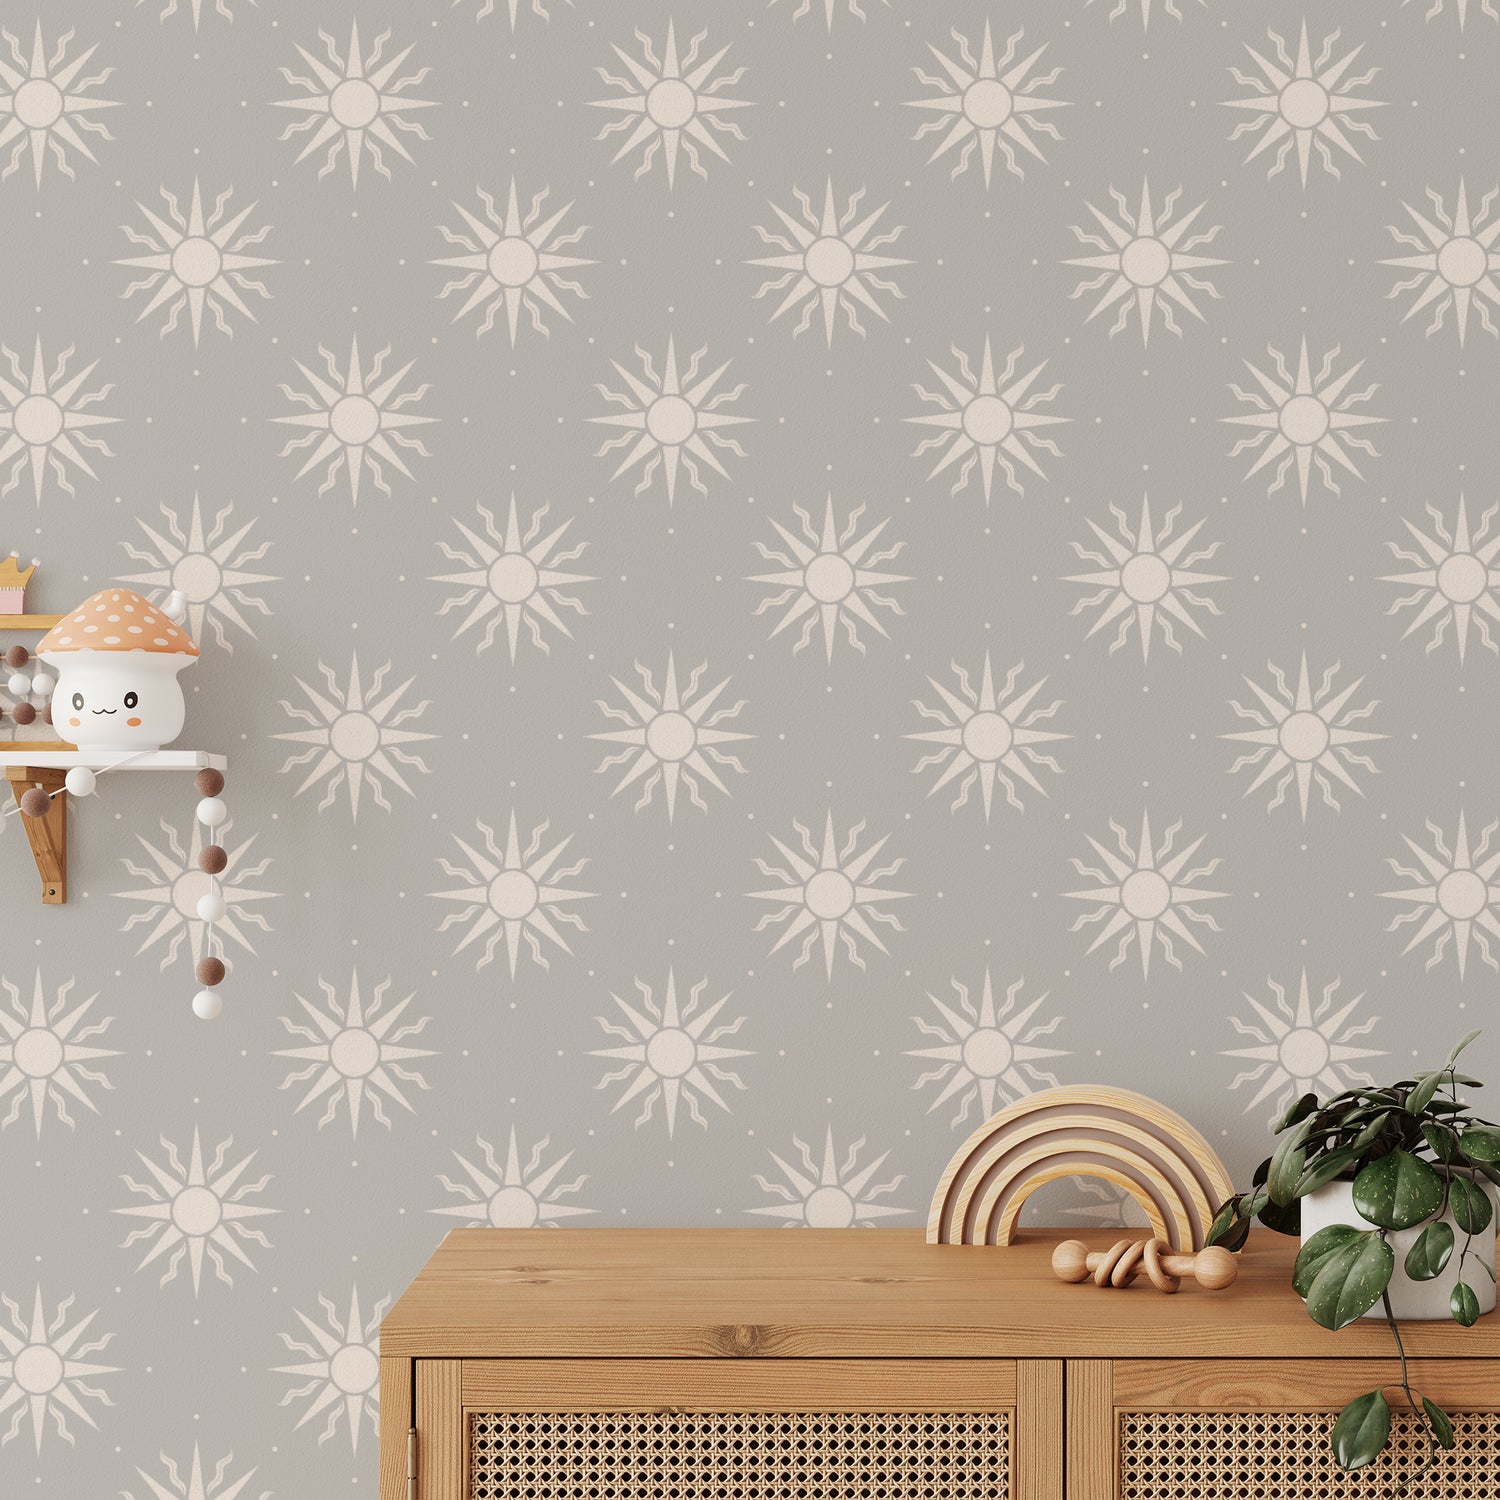 Sunny Suns Wallpaper in Gray shown in a kids bedroom.